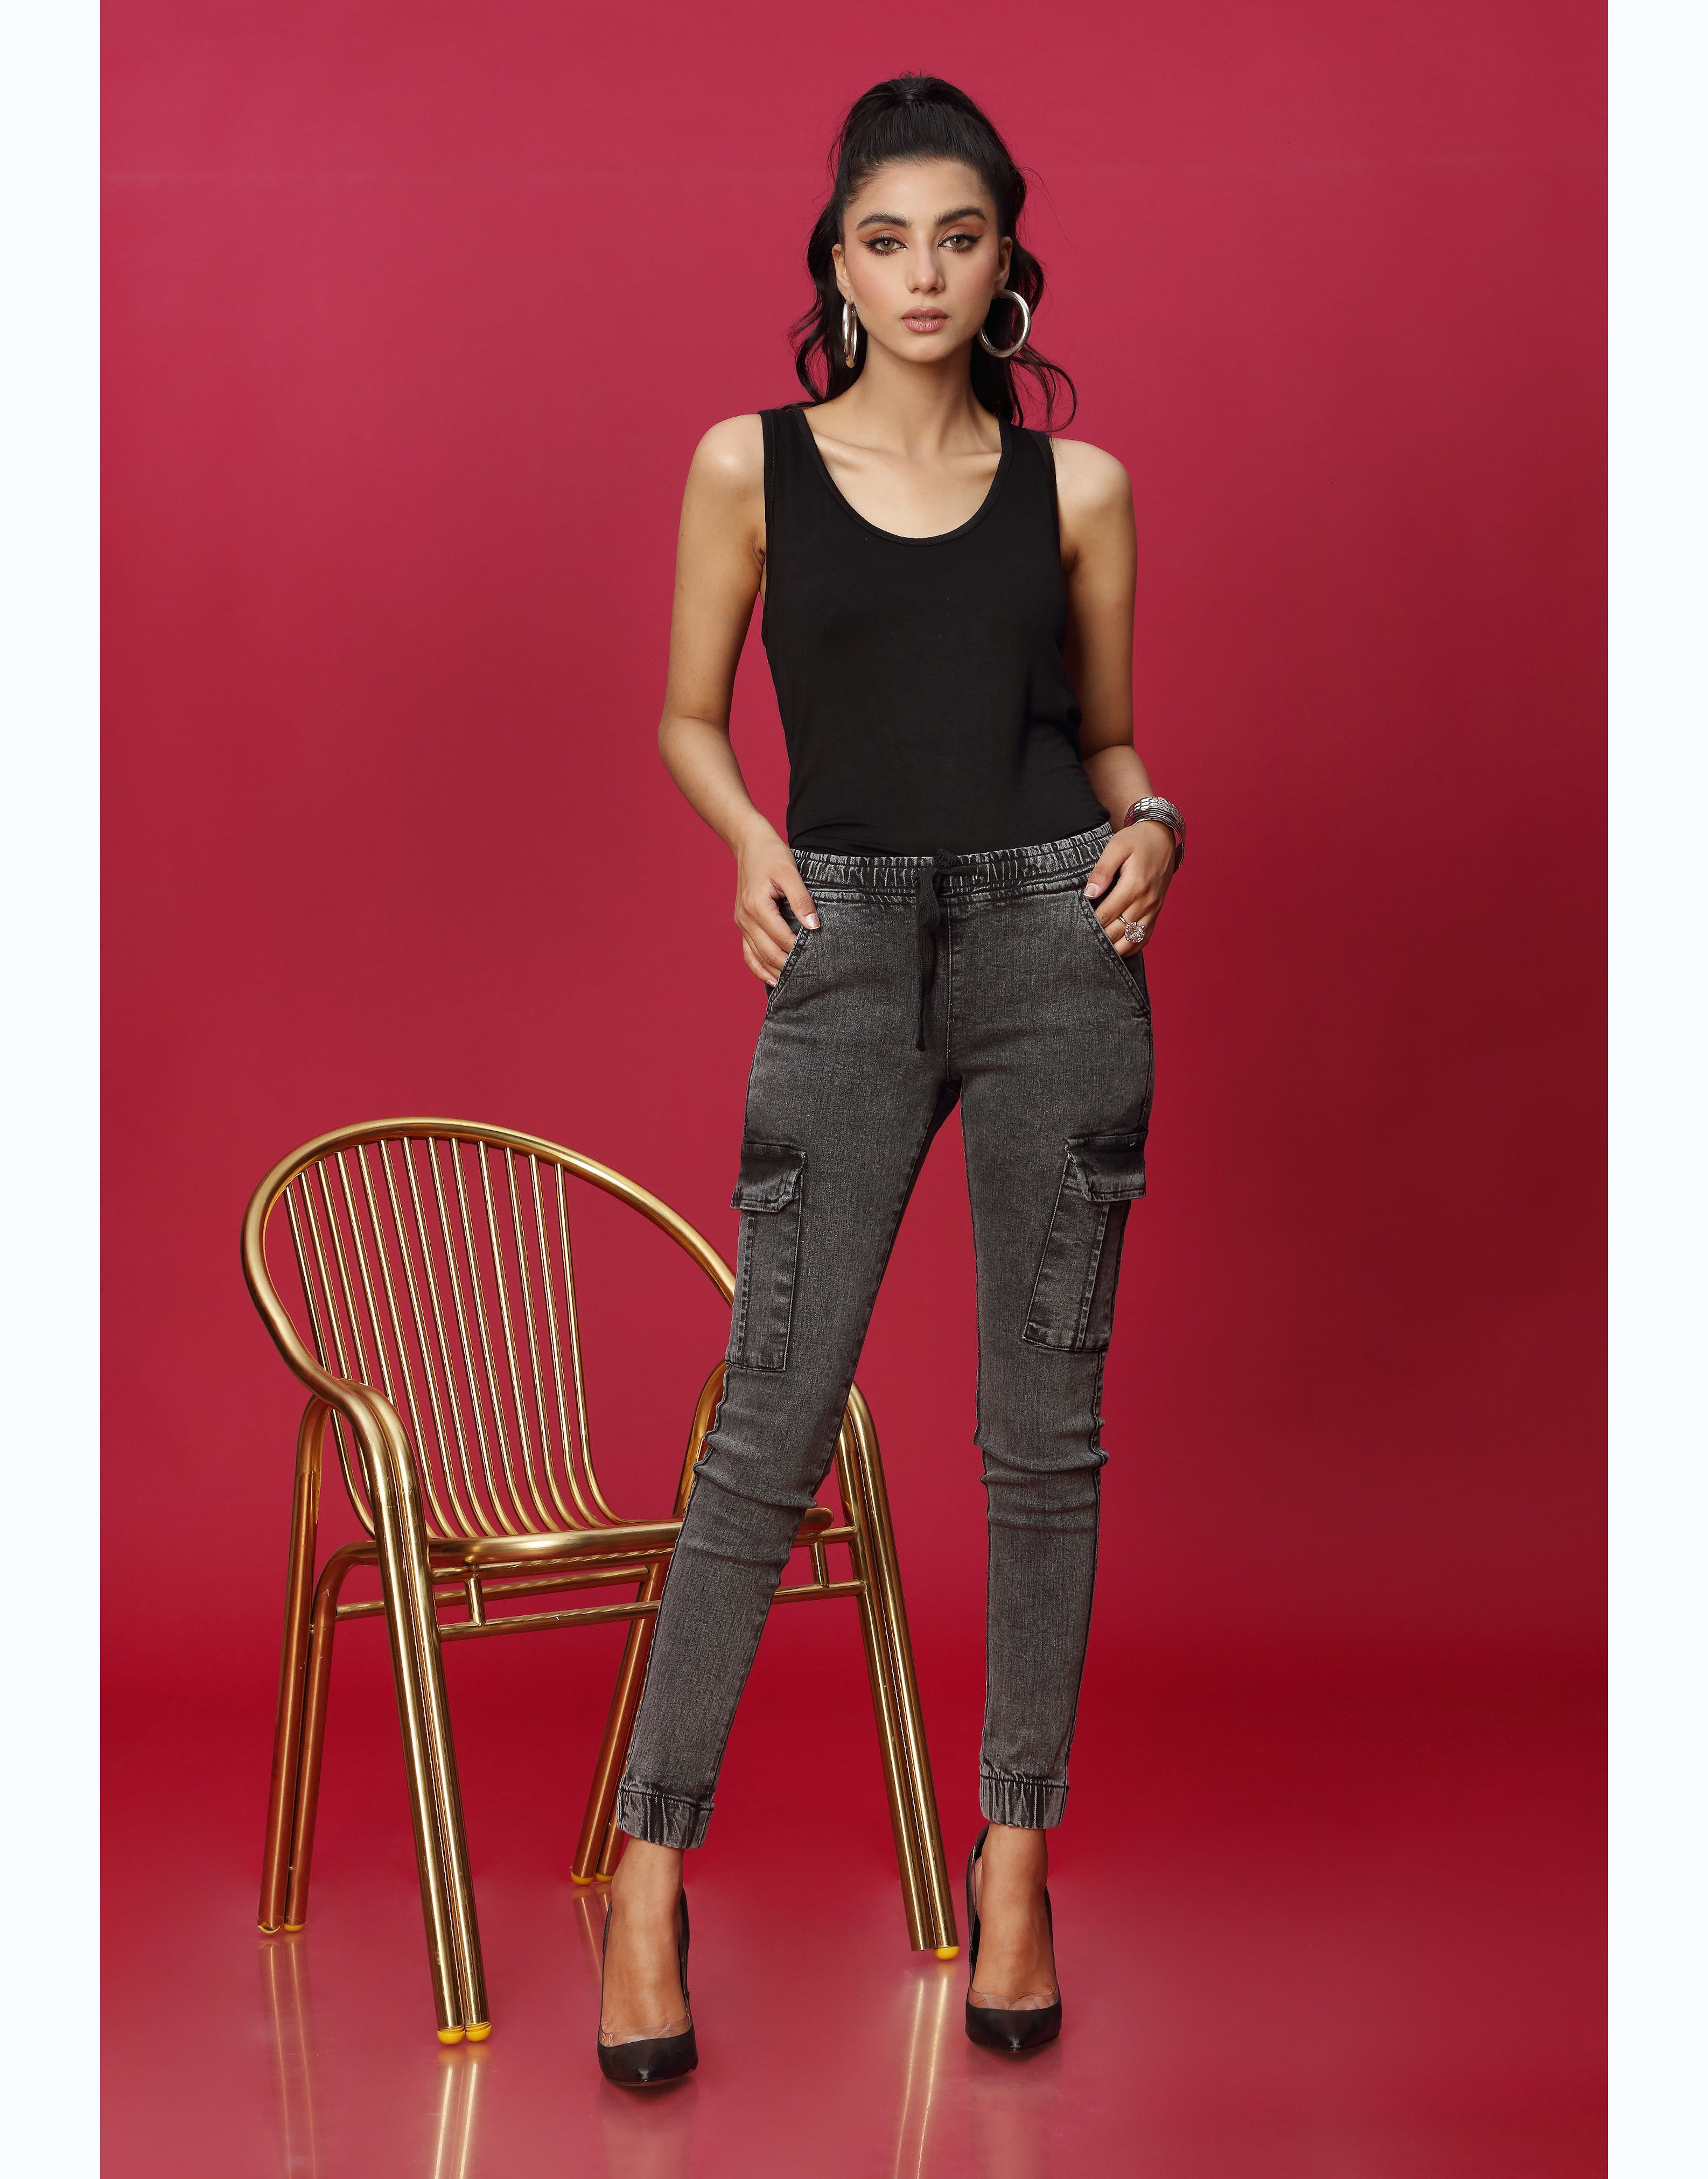 High Rise Skinny Jeans With Side Pockets in Charcoal Black